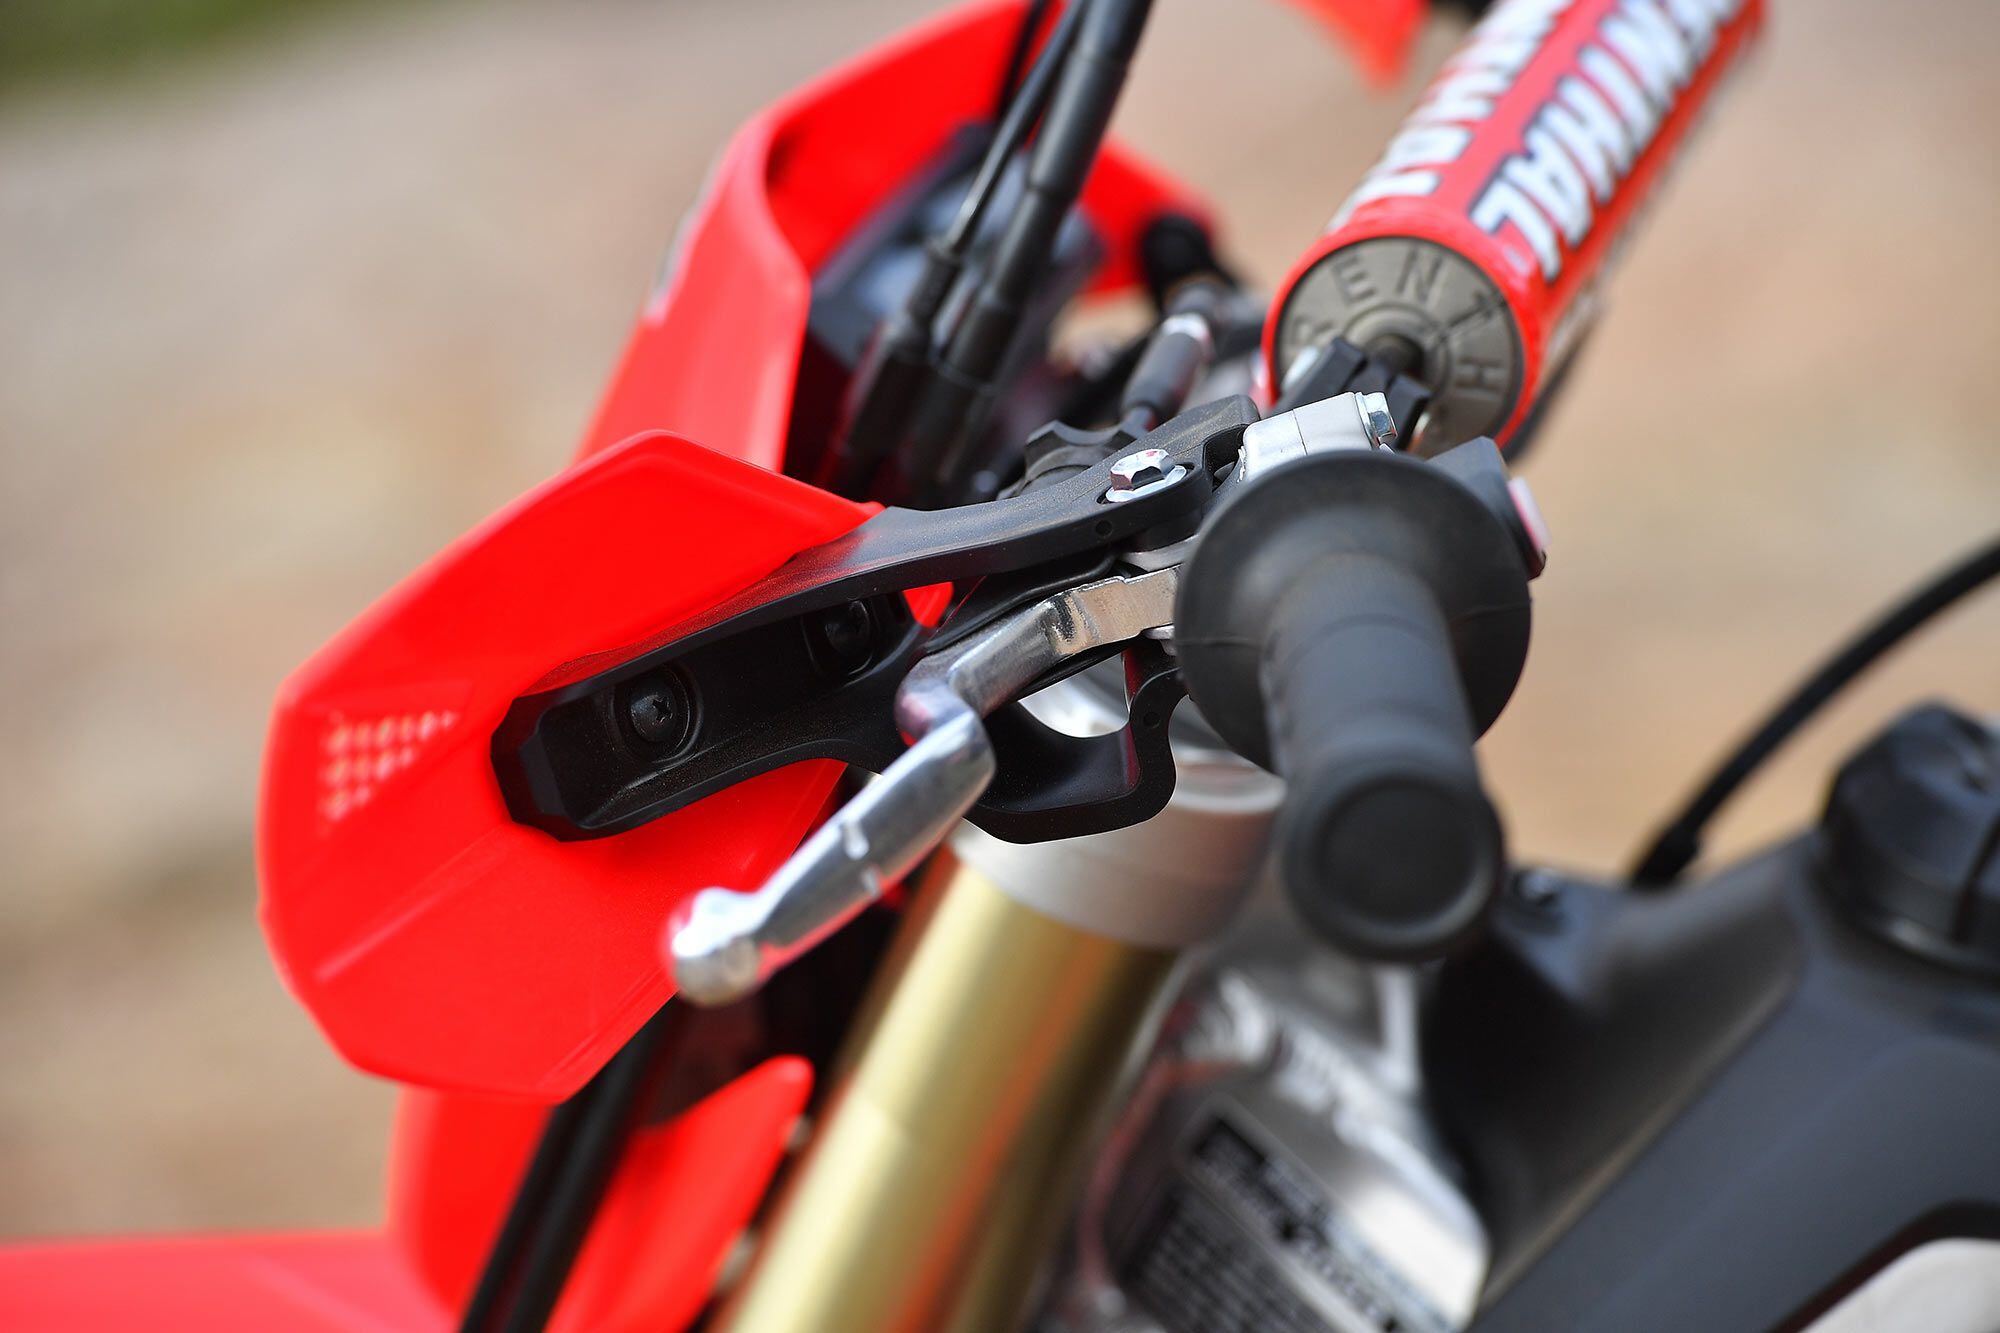 A cable-actuated clutch still comes standard on the CRF450X, where the CRF450R and CRF450RX machines receive hydraulic units. The hand guards are CRF450X-specific to fit the clutch perch and differing front brake master cylinder components.